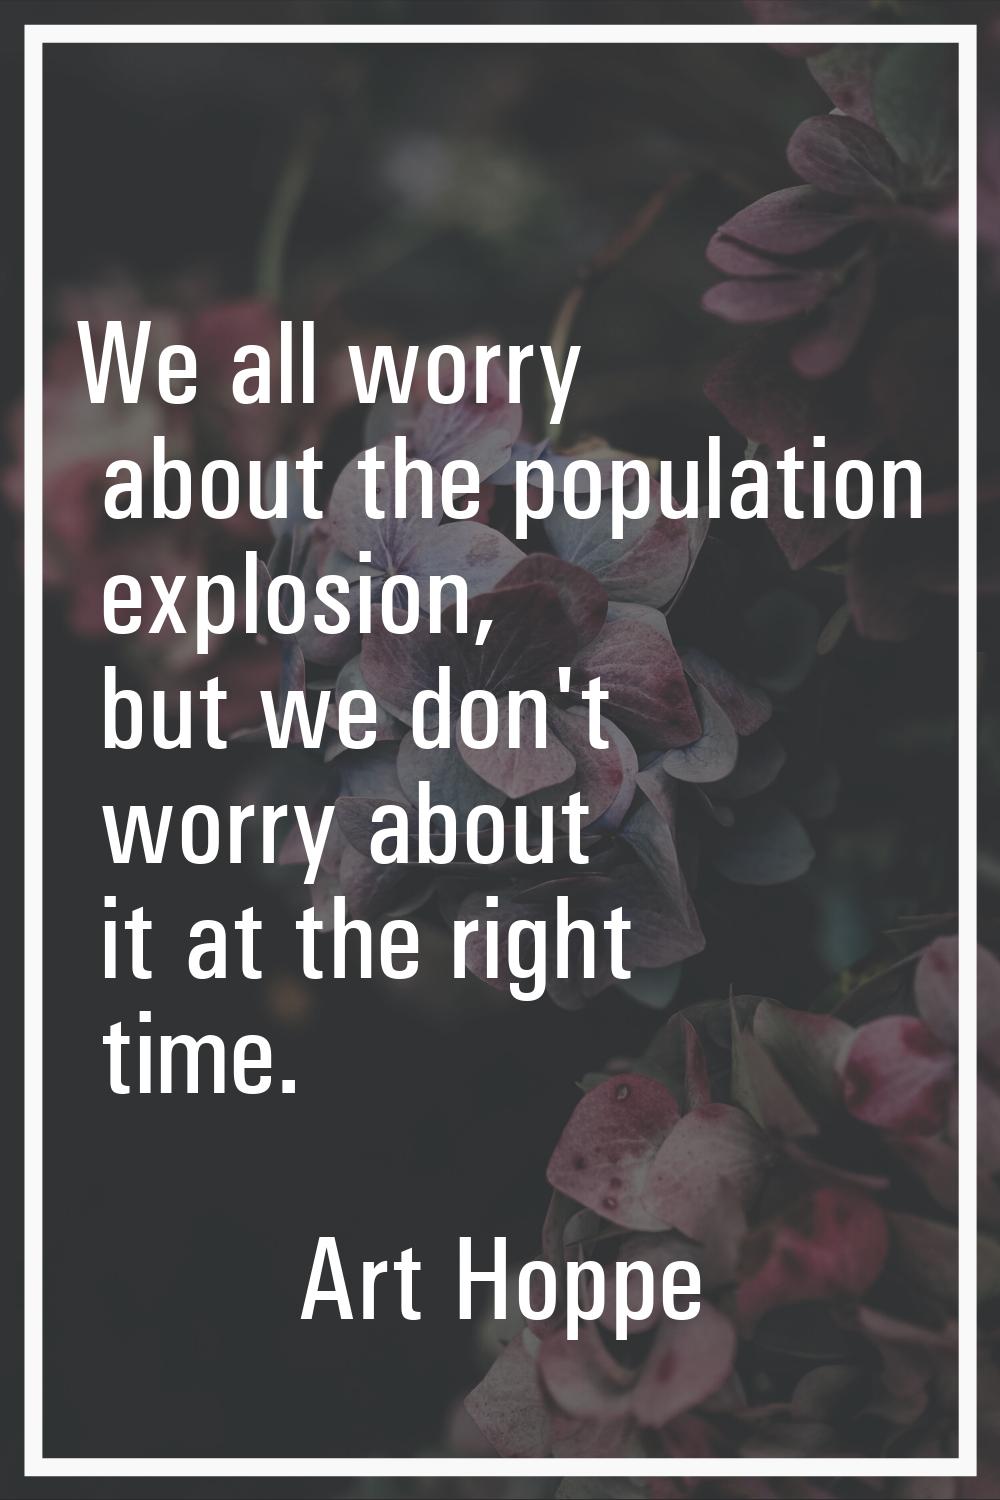 We all worry about the population explosion, but we don't worry about it at the right time.